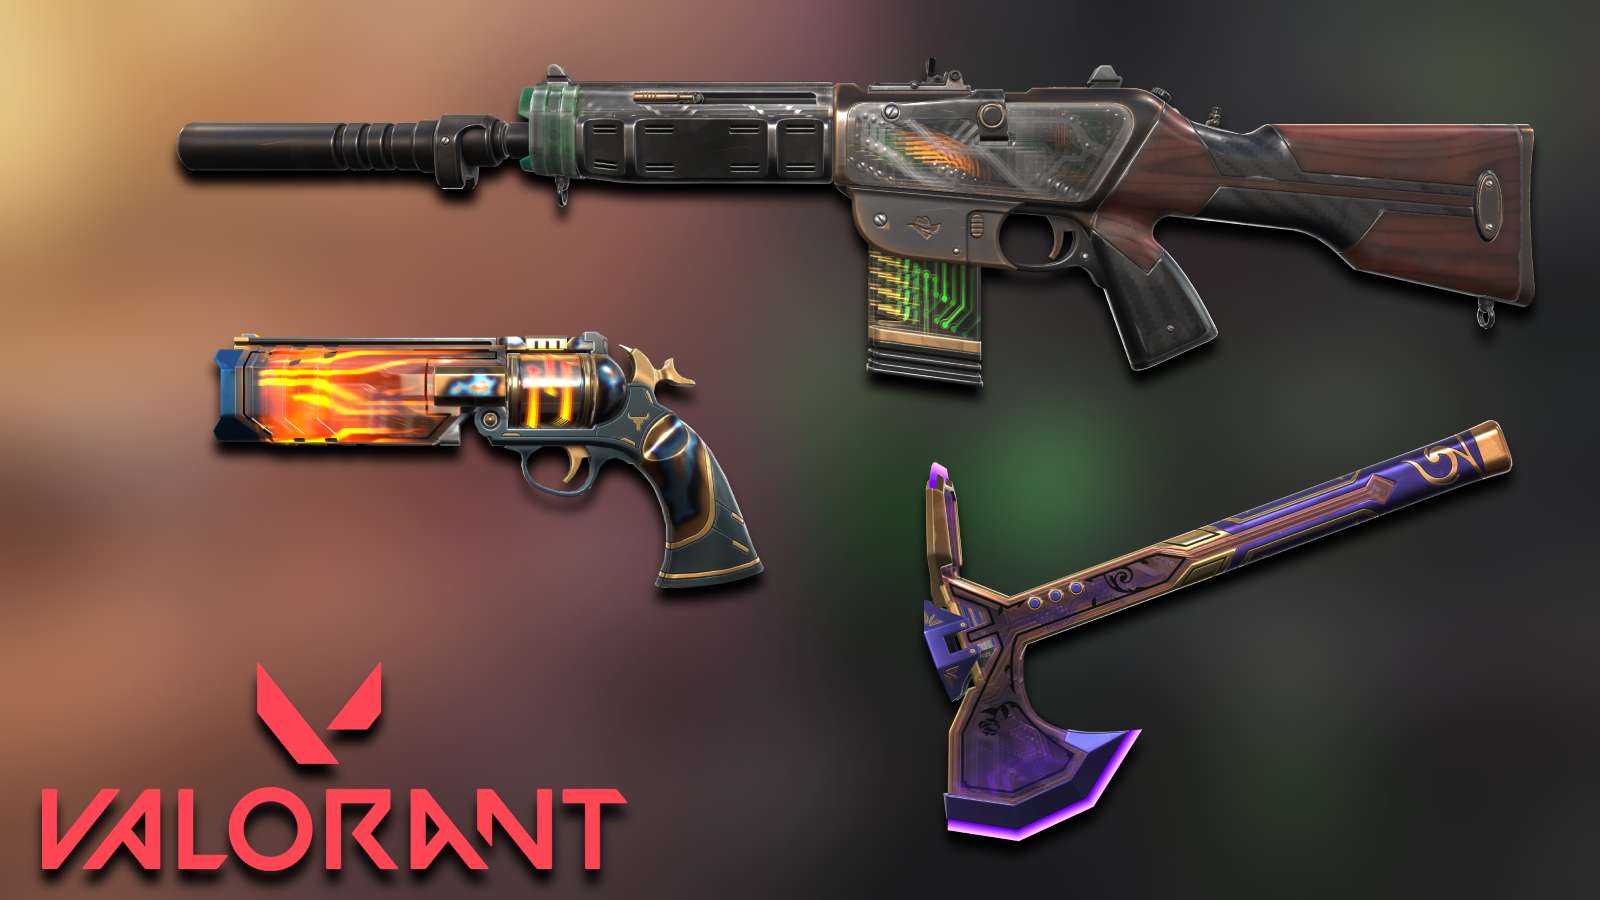 Neo Frontier Skinline in Valorant featuring Phantom, Sheriff, and Melee (Axe) skin variants